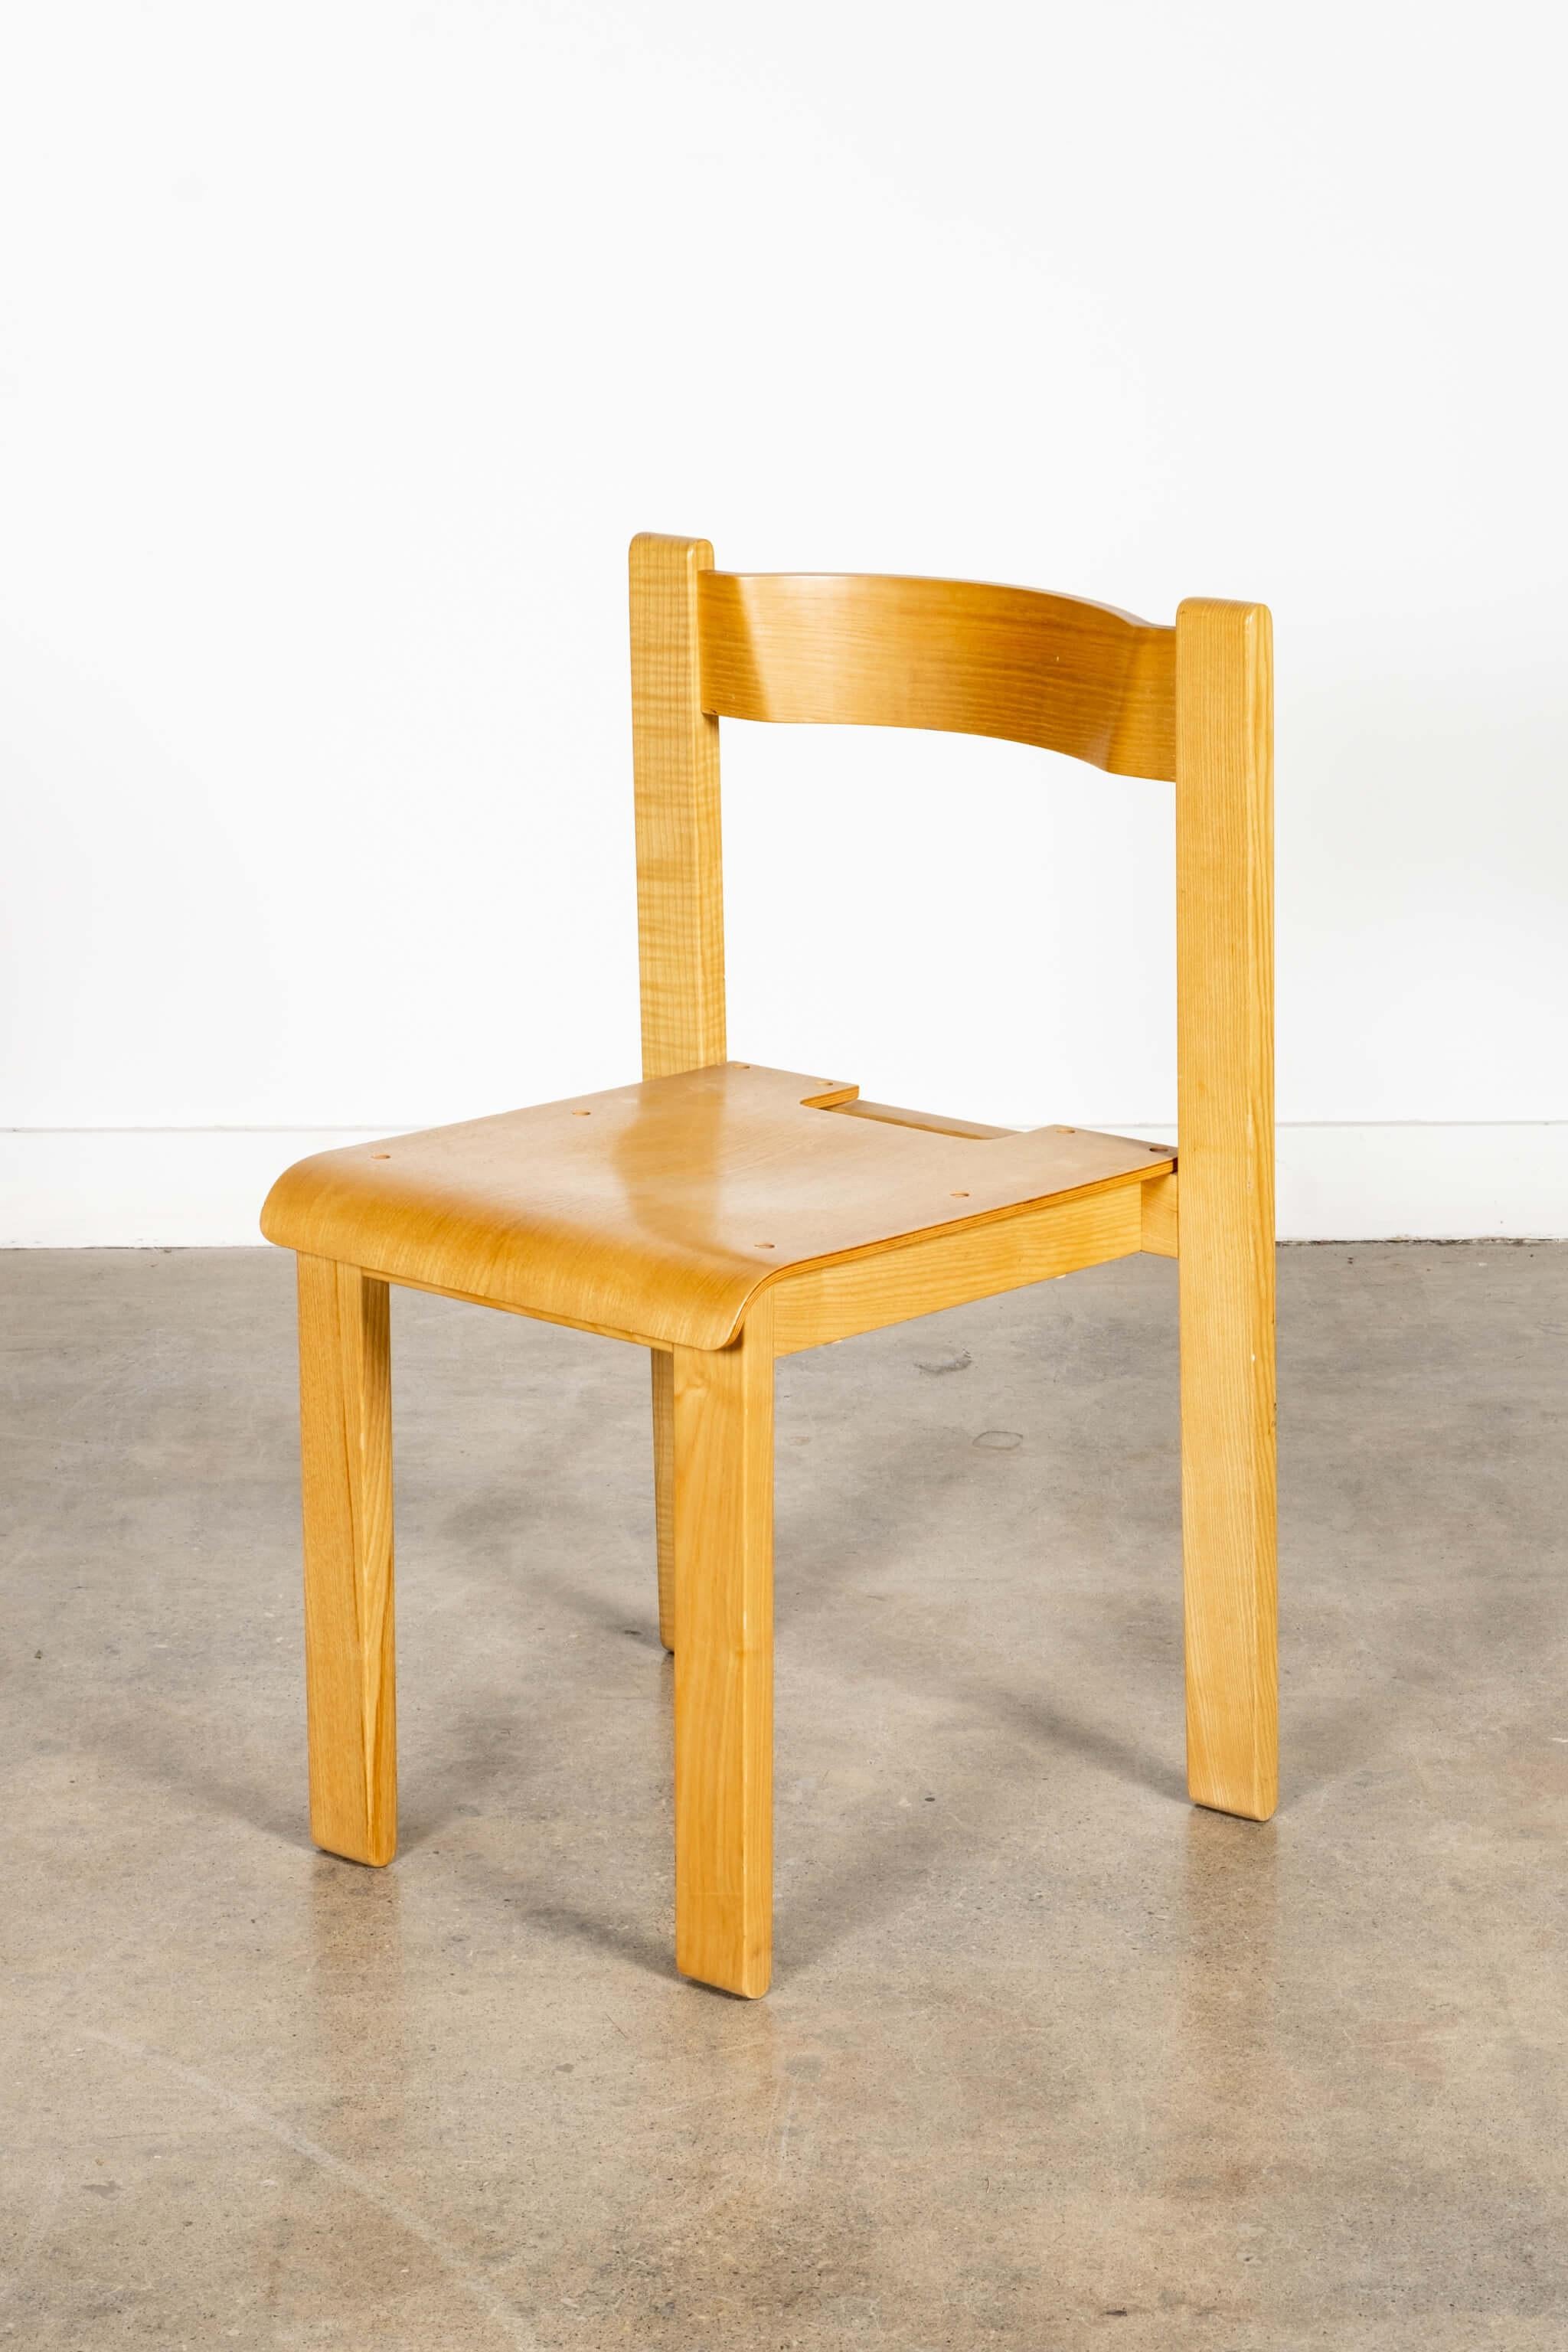 Italian Set of 4 Plywood School Chairs by Vico Magistretti For Sale